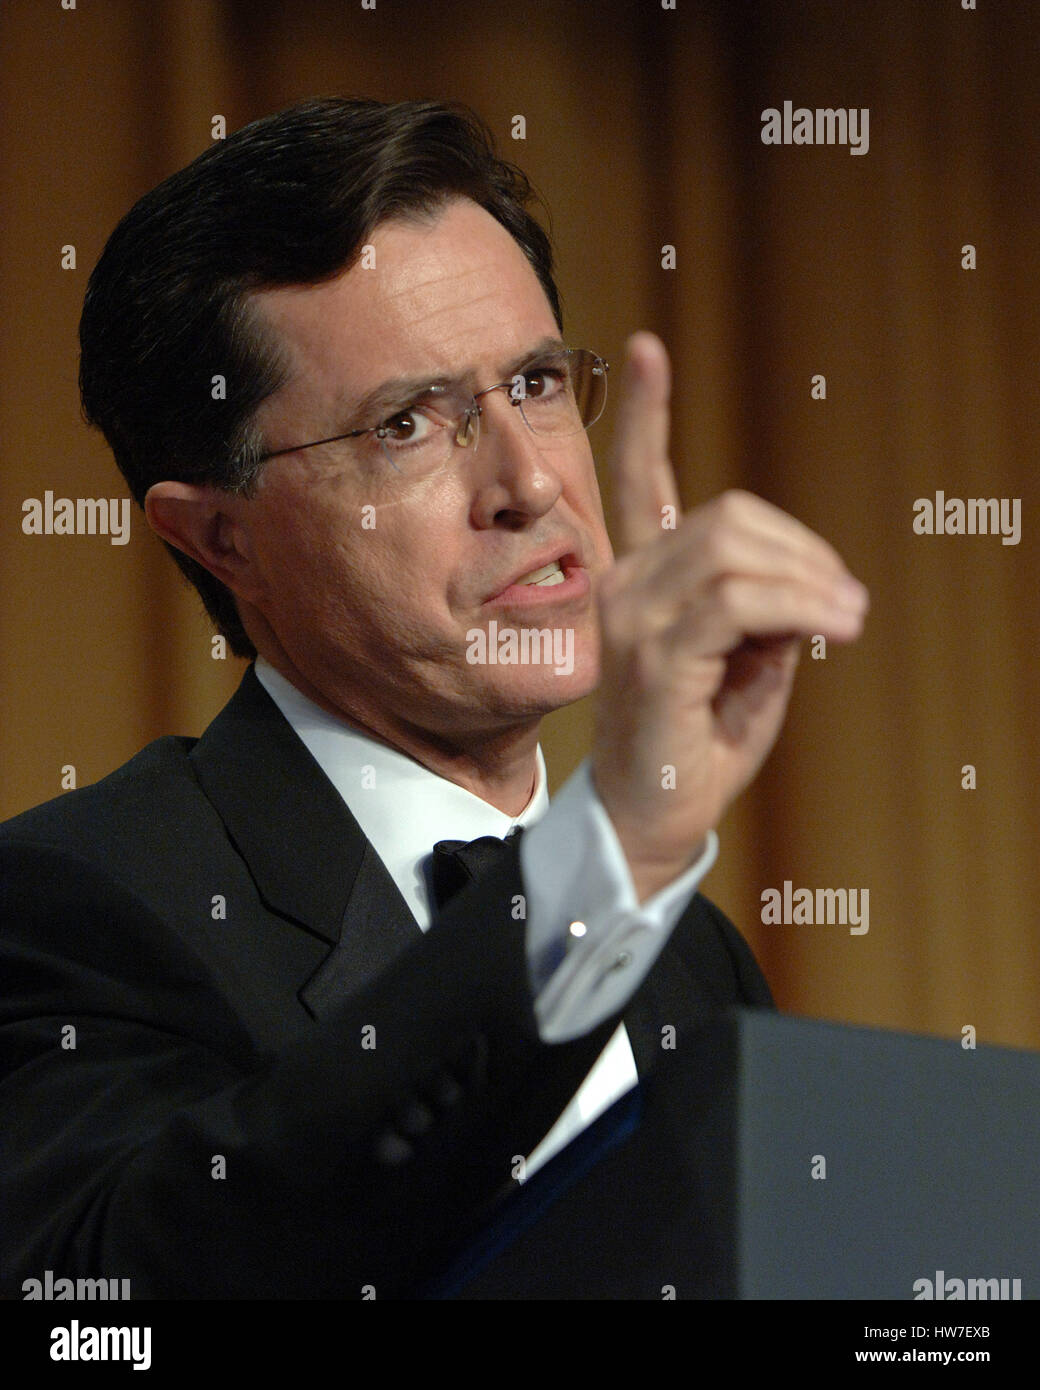 Comedian Stephen Colbert entertains guests the White House Correspondents' Association Dinner the Washington Hilton Hotel in Washington on April 29 2006. Stock Photo